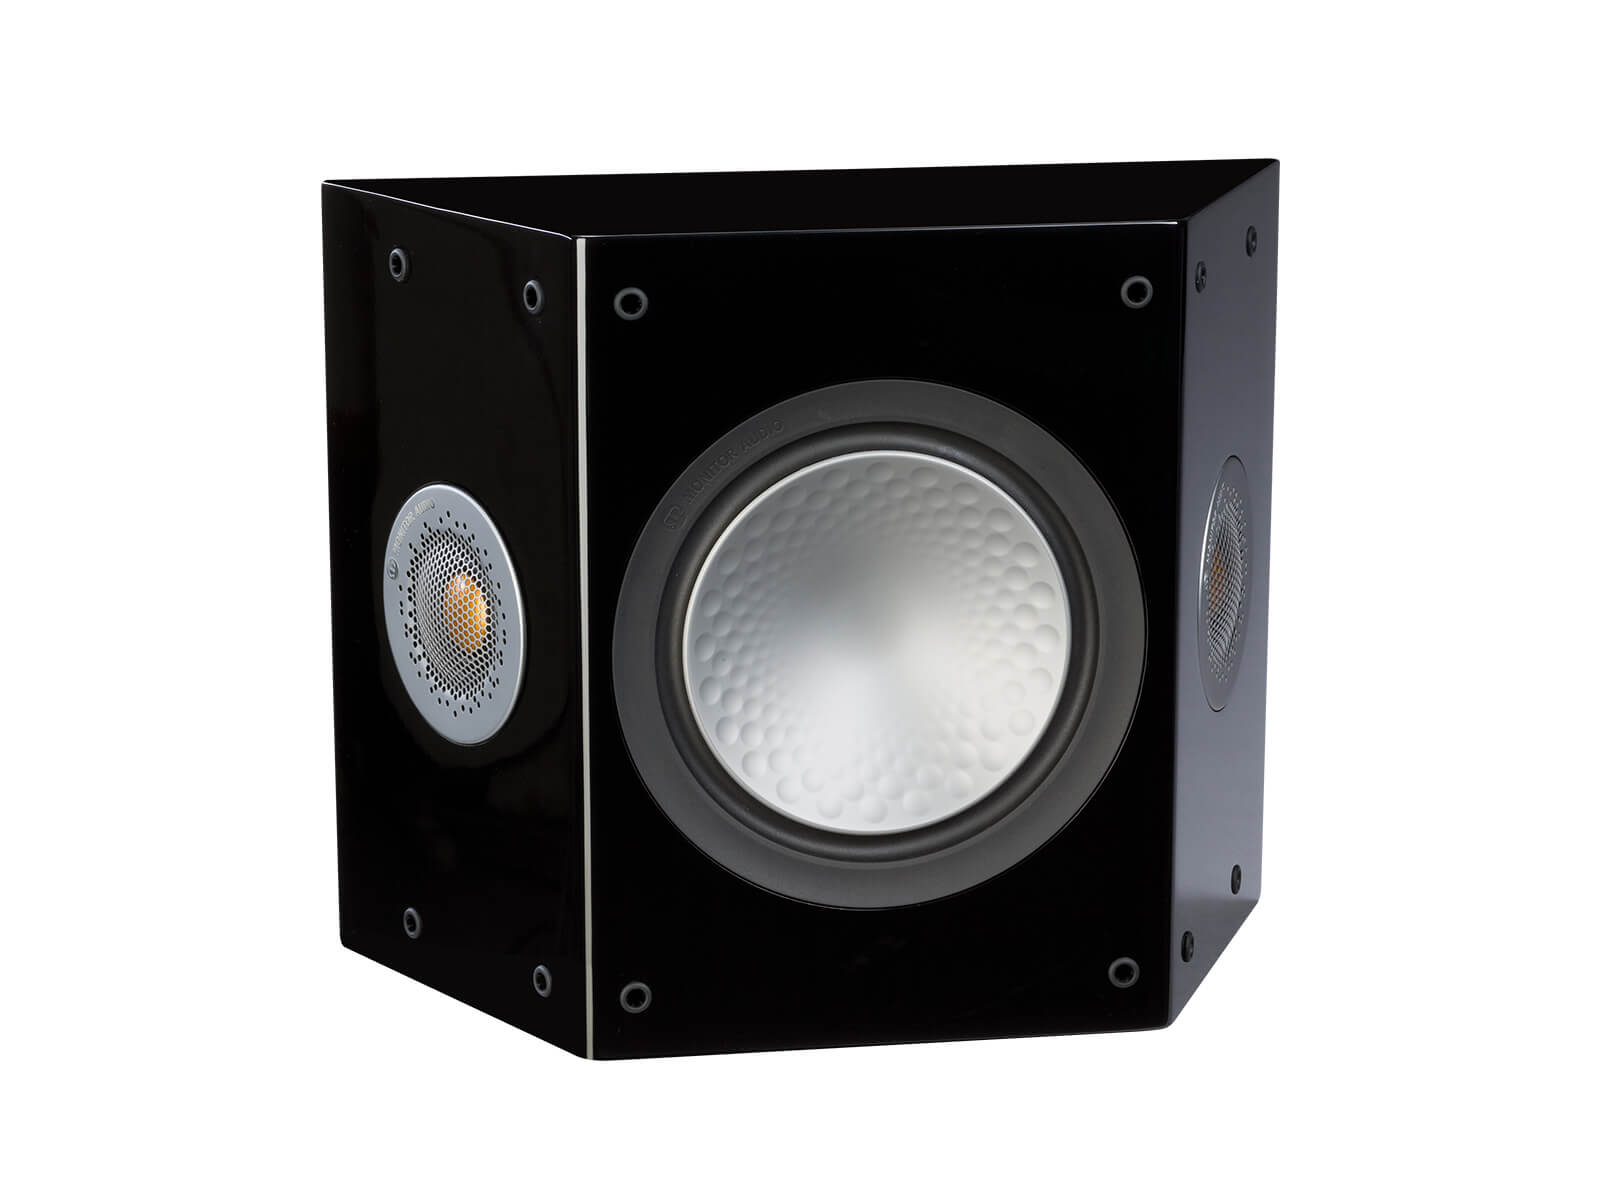 Silver FX, grille-less surround speakers, with a high gloss black finish.